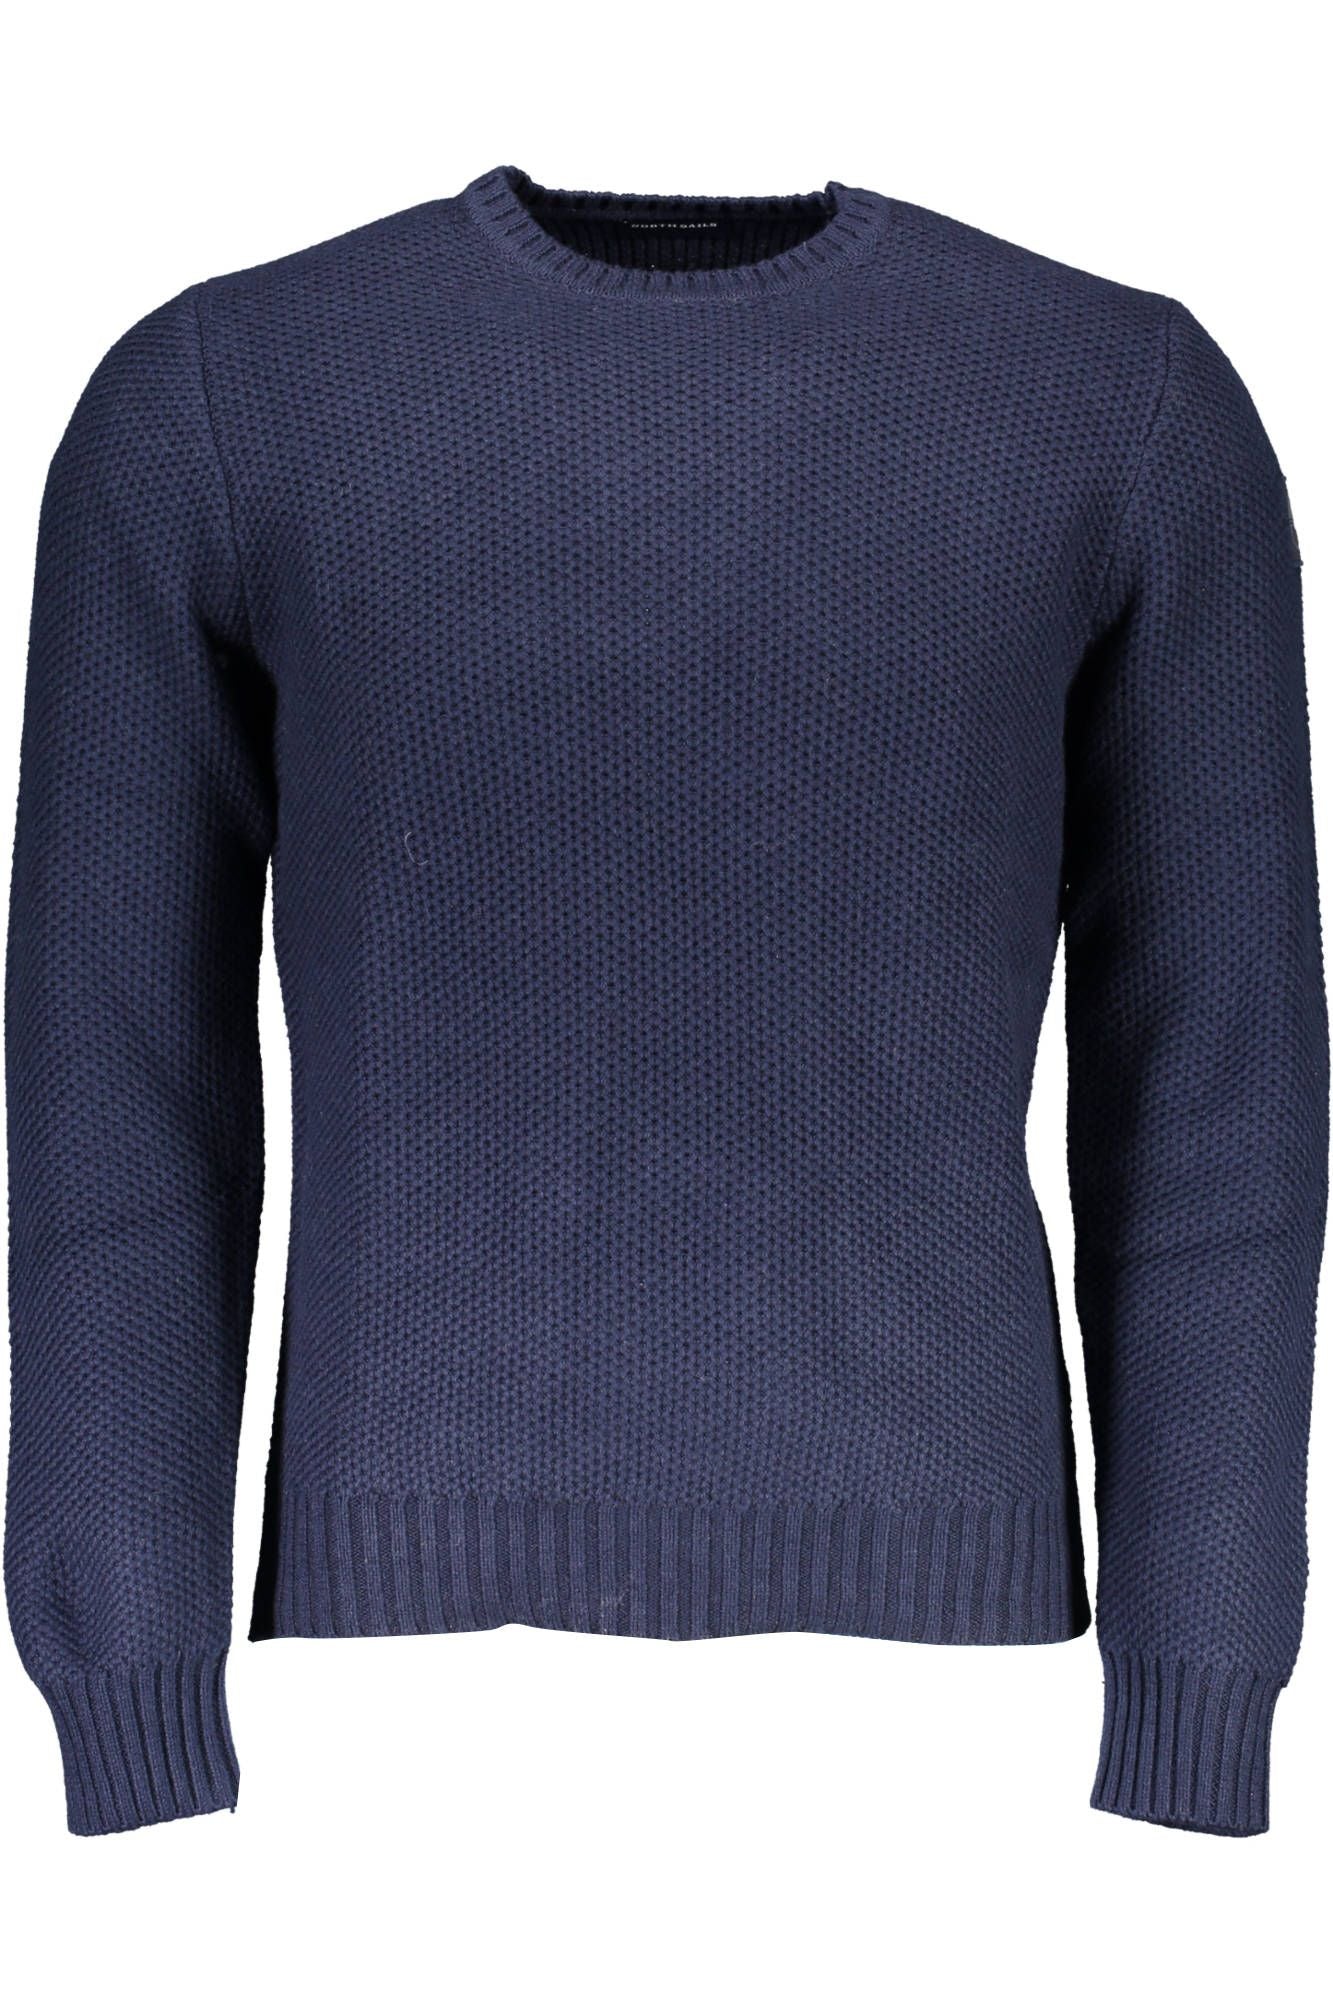 Blue Round Neck Sweater with Contrasting Details